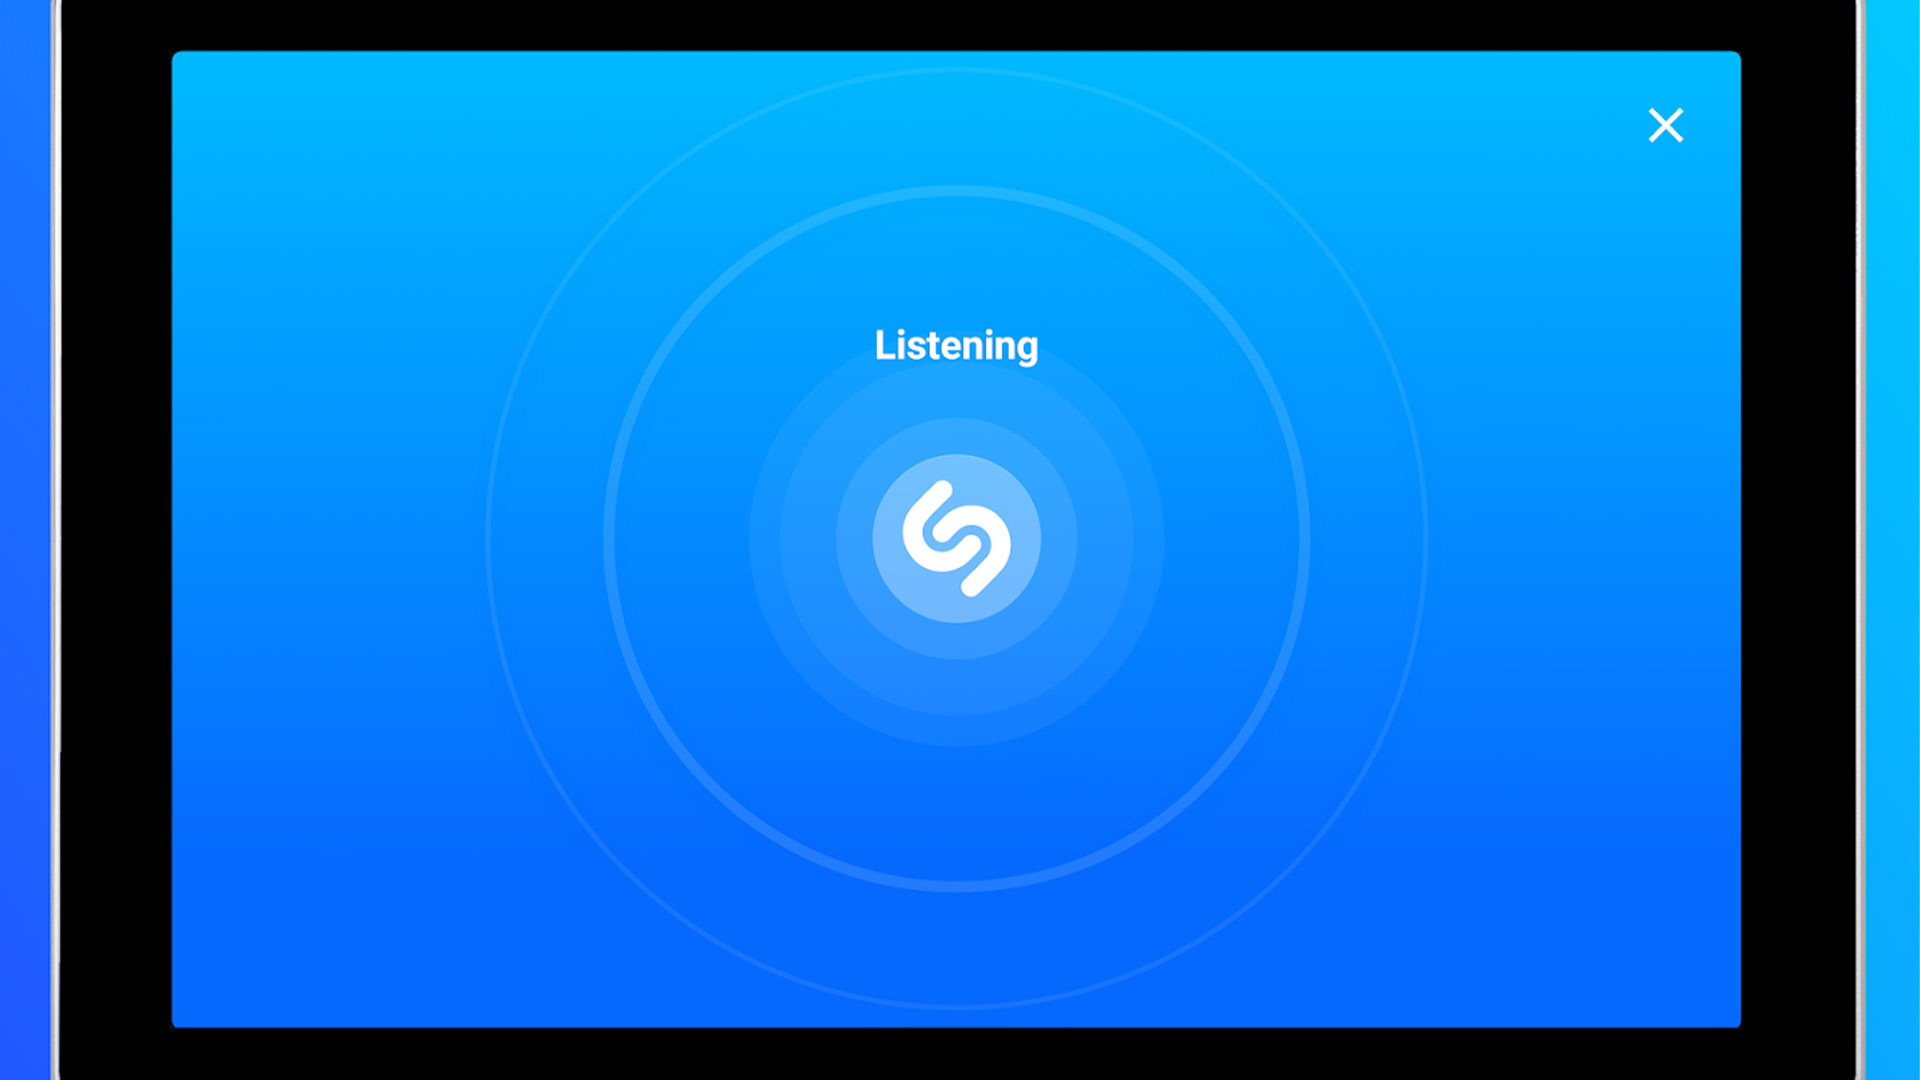 Shazam best music recognition apps for Android